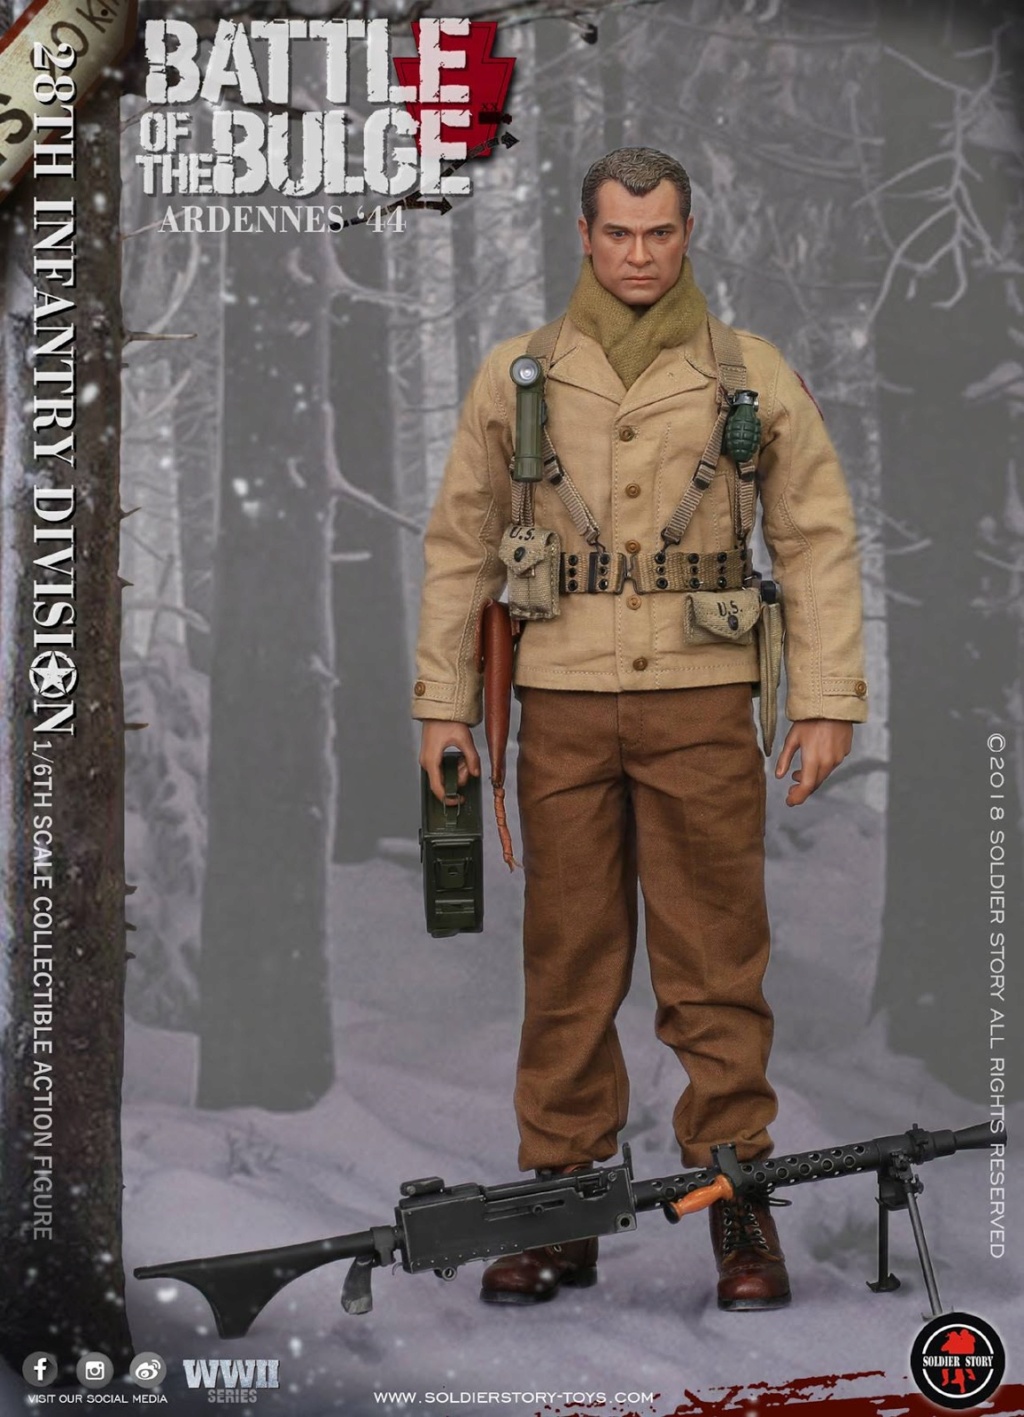 male - NEW PRODUCT: Soldier Story: 1/6 scale U.S. Army 28th Infantry Division Ardennes 1944 Bulge112